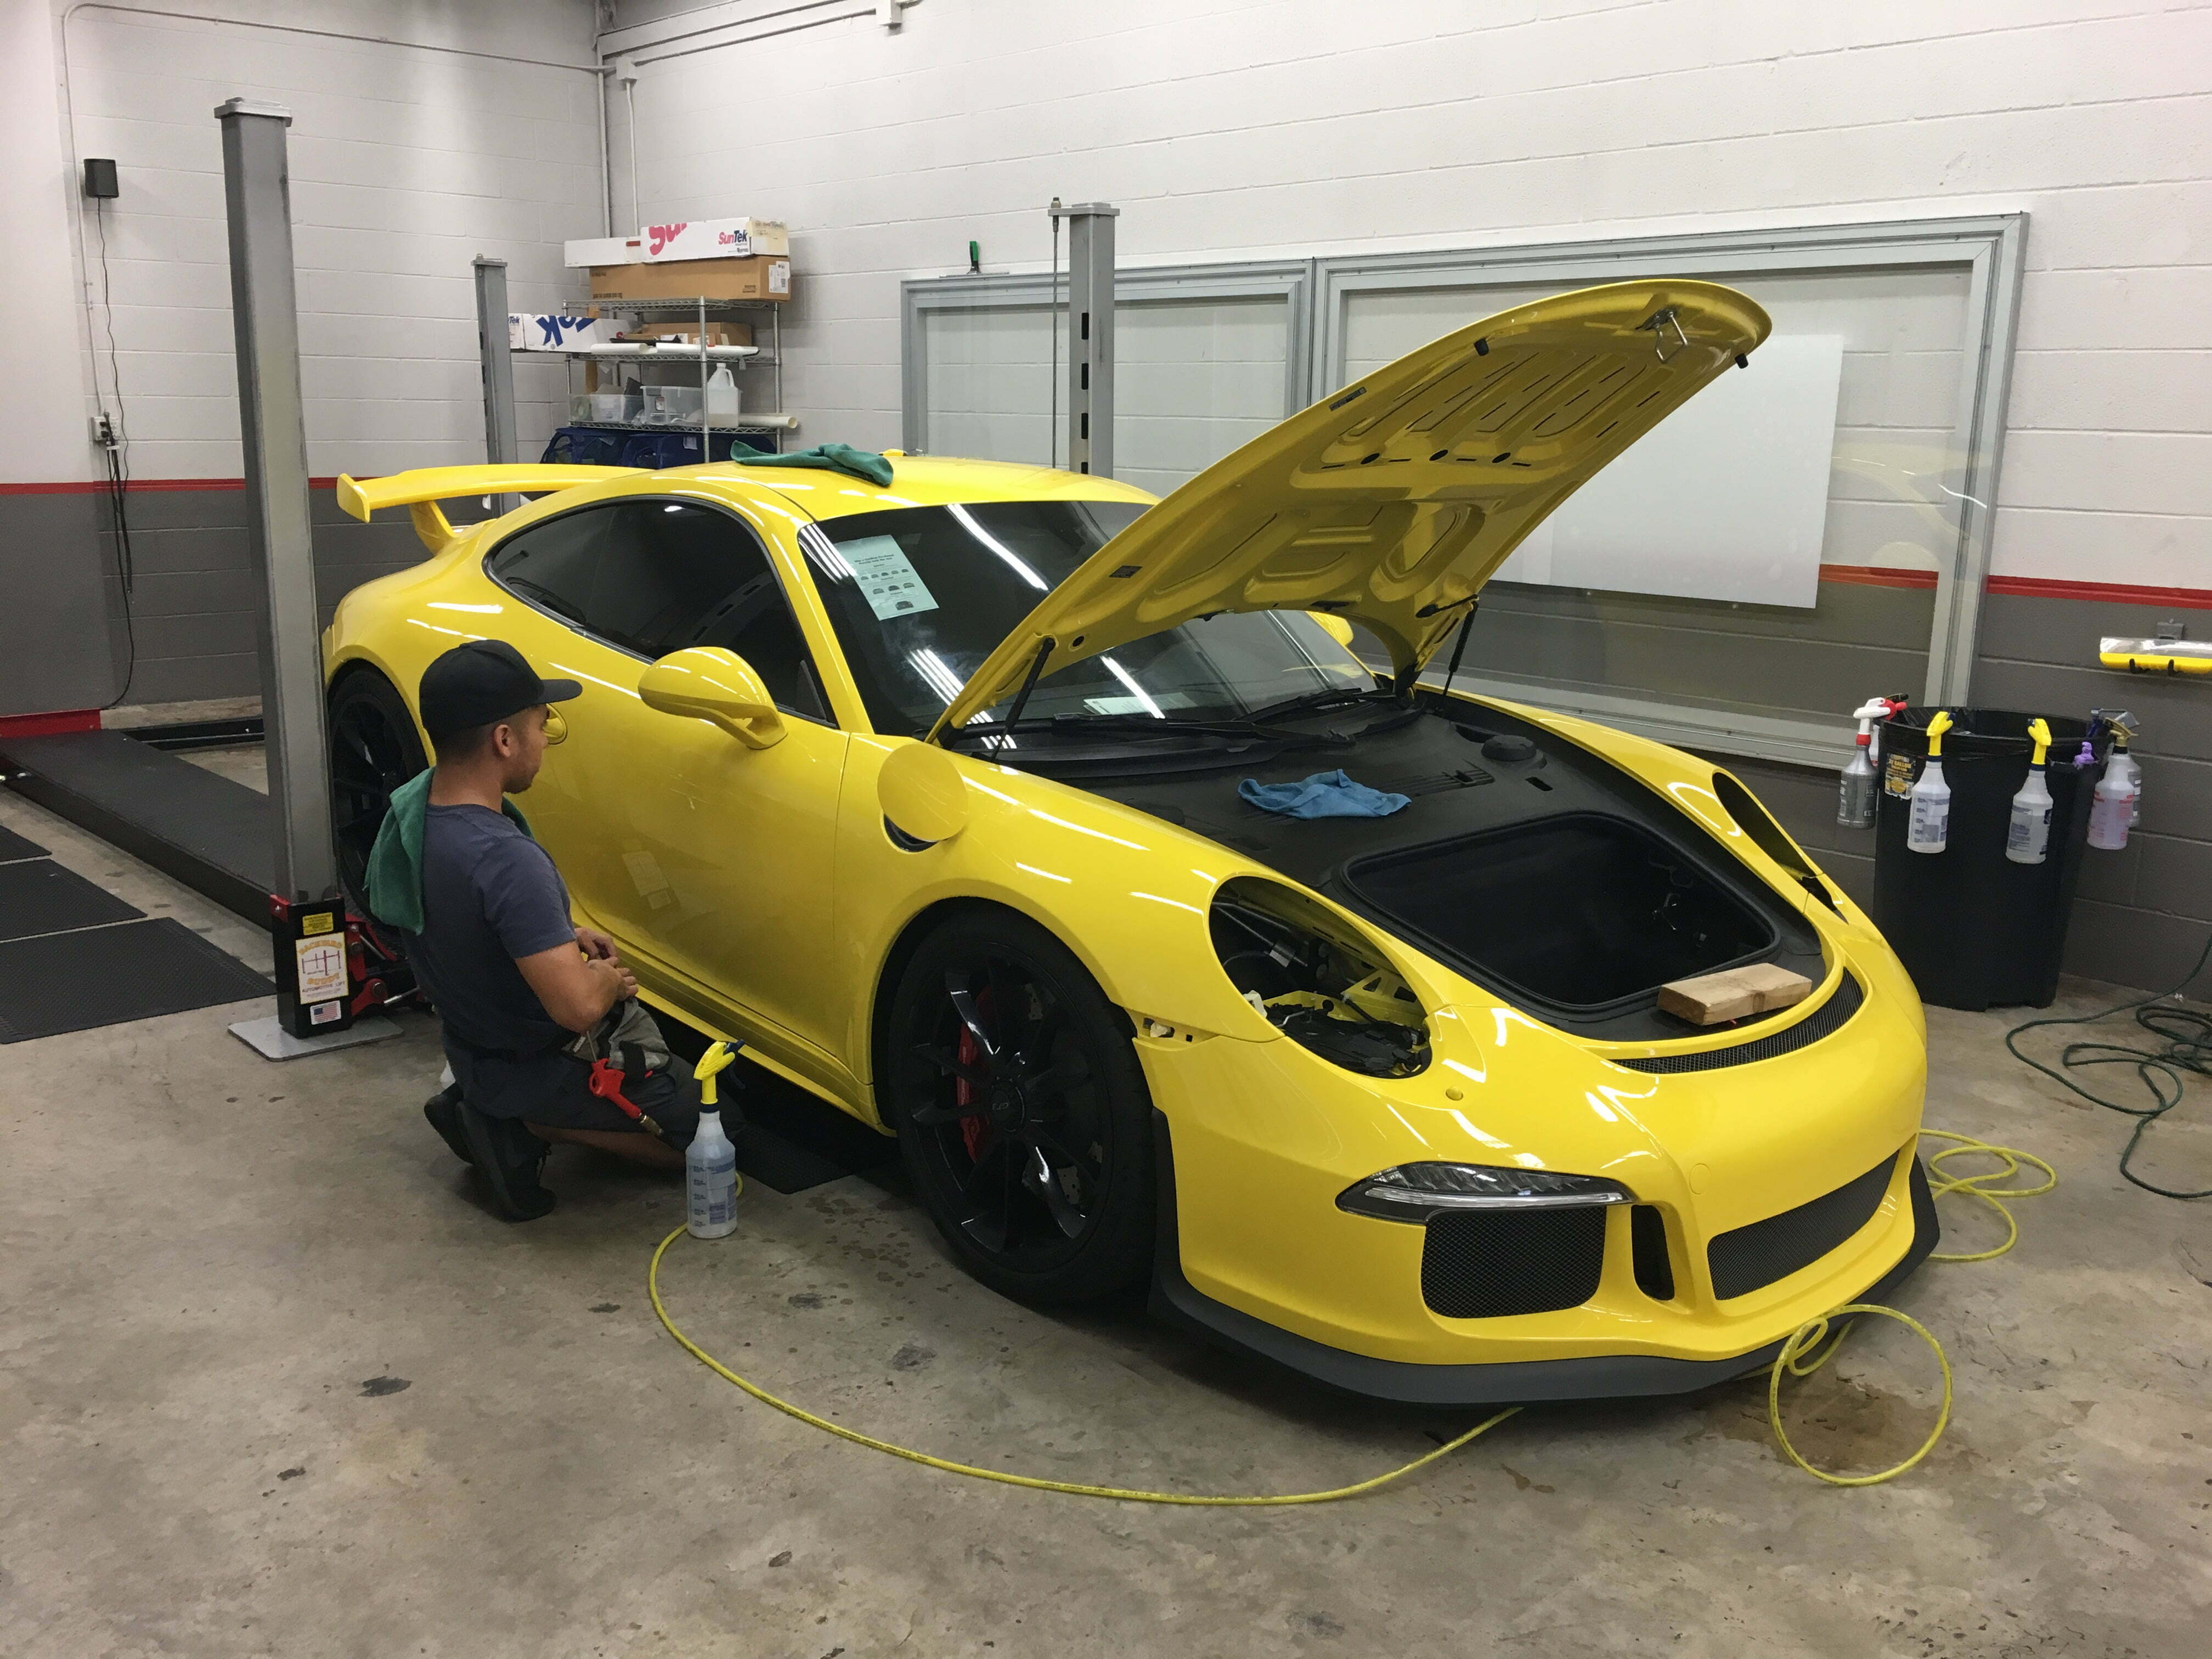 Paint protections process